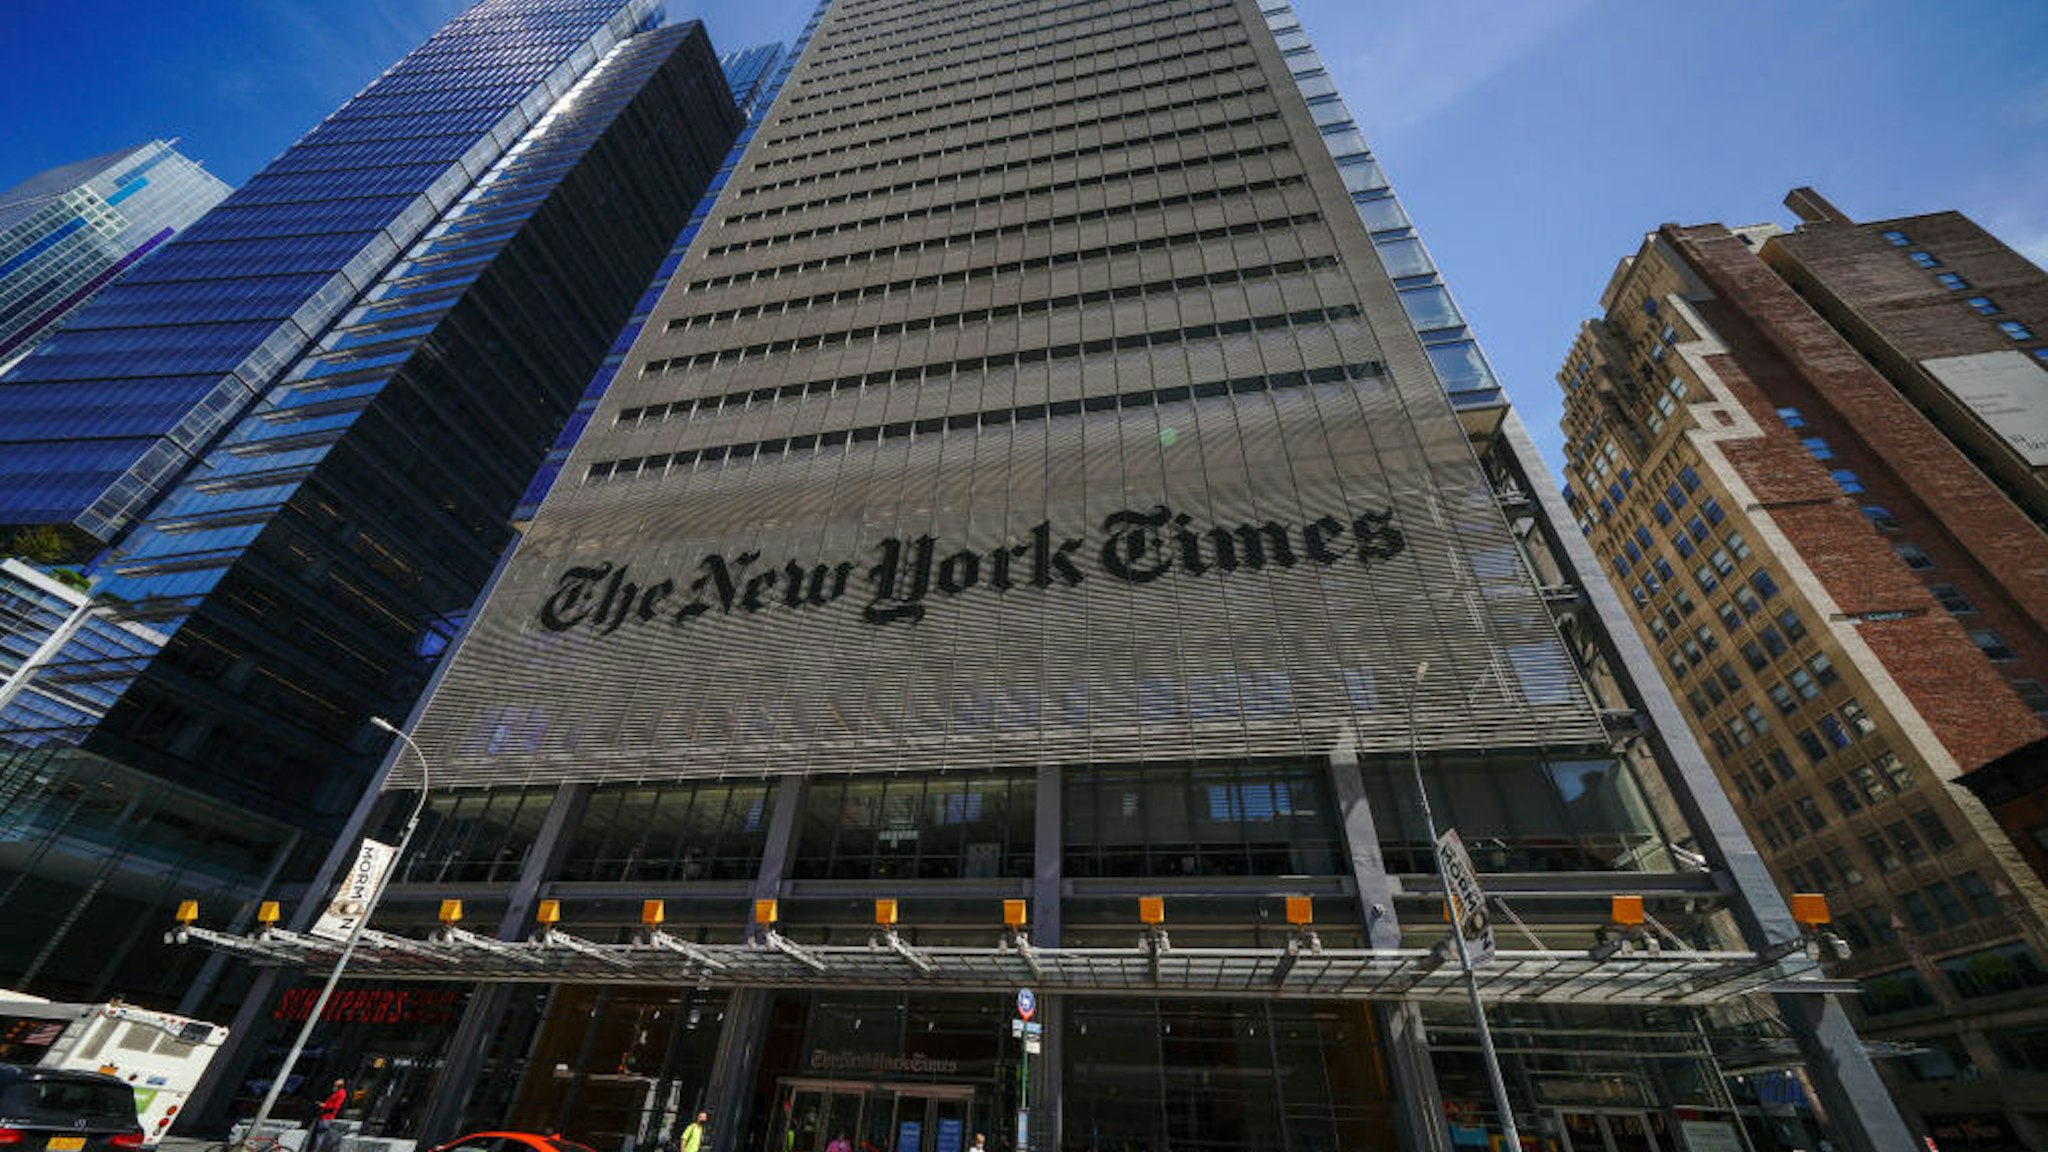 NEW YORK, UNITED STATES - 2020/08/20: A view of The New York Times Building Headquarters.